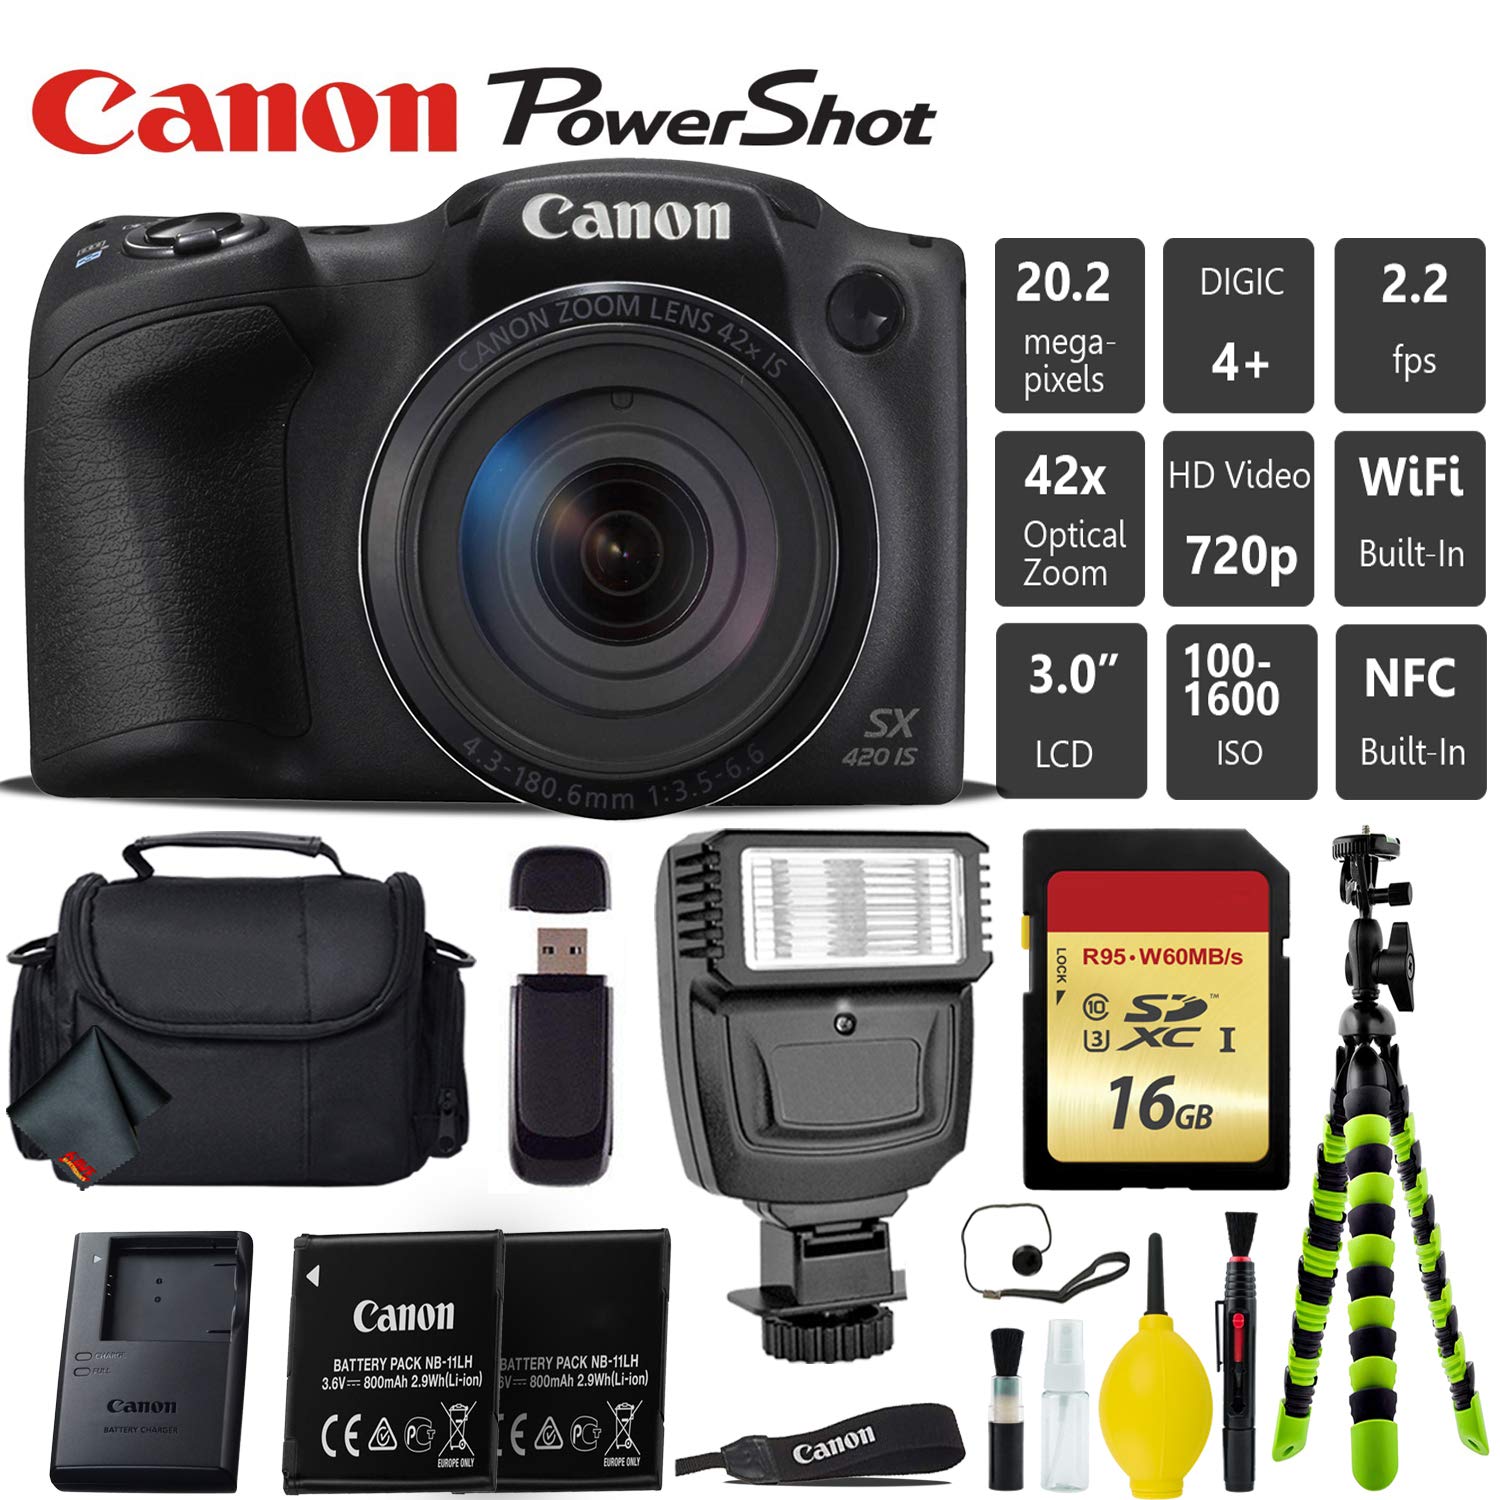 Canon PowerShot SX420 is Digital Point and Shoot Camera + Extra Battery + Digital Flash + Camera Case + 16GB Class 10 Memory Card + 2 Year Extended Warranty (Total of 3YR) - Intl Model - image 1 of 5